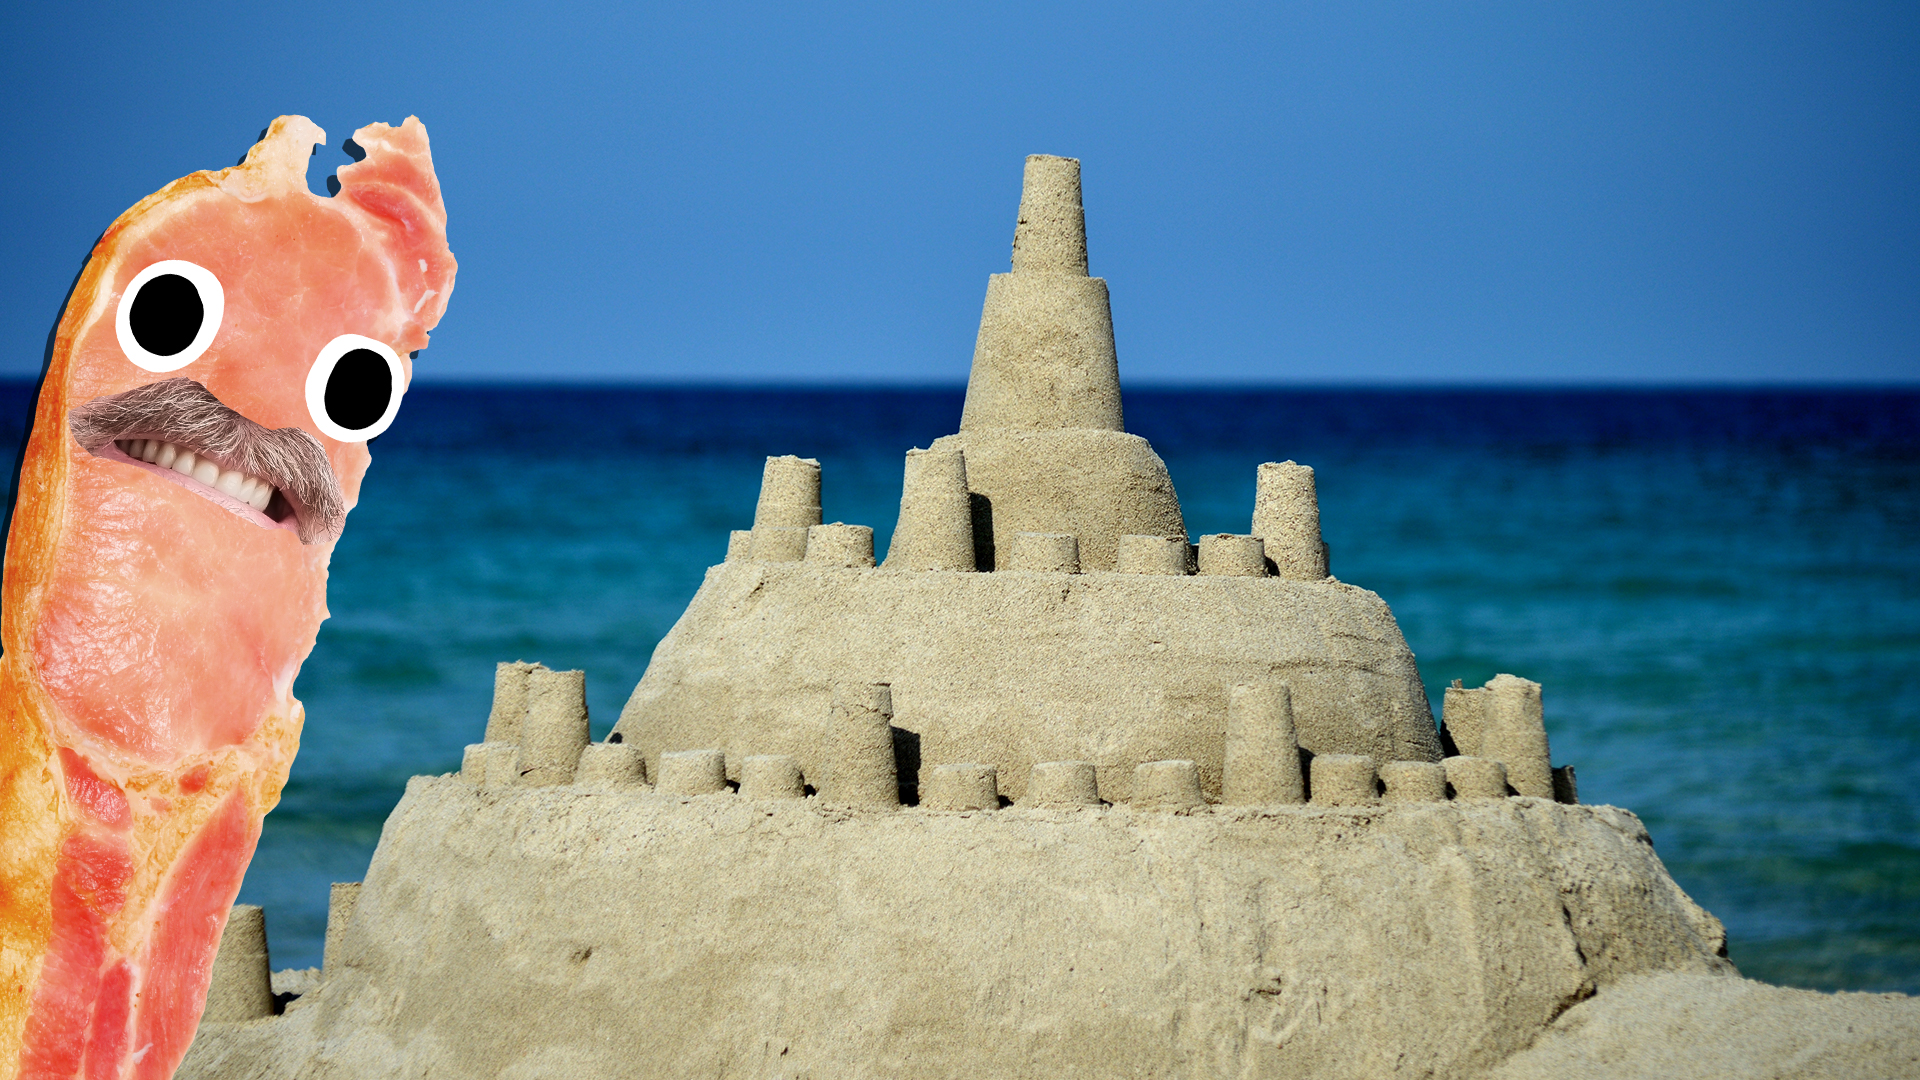 Bacon Dad looks at a sandcastle